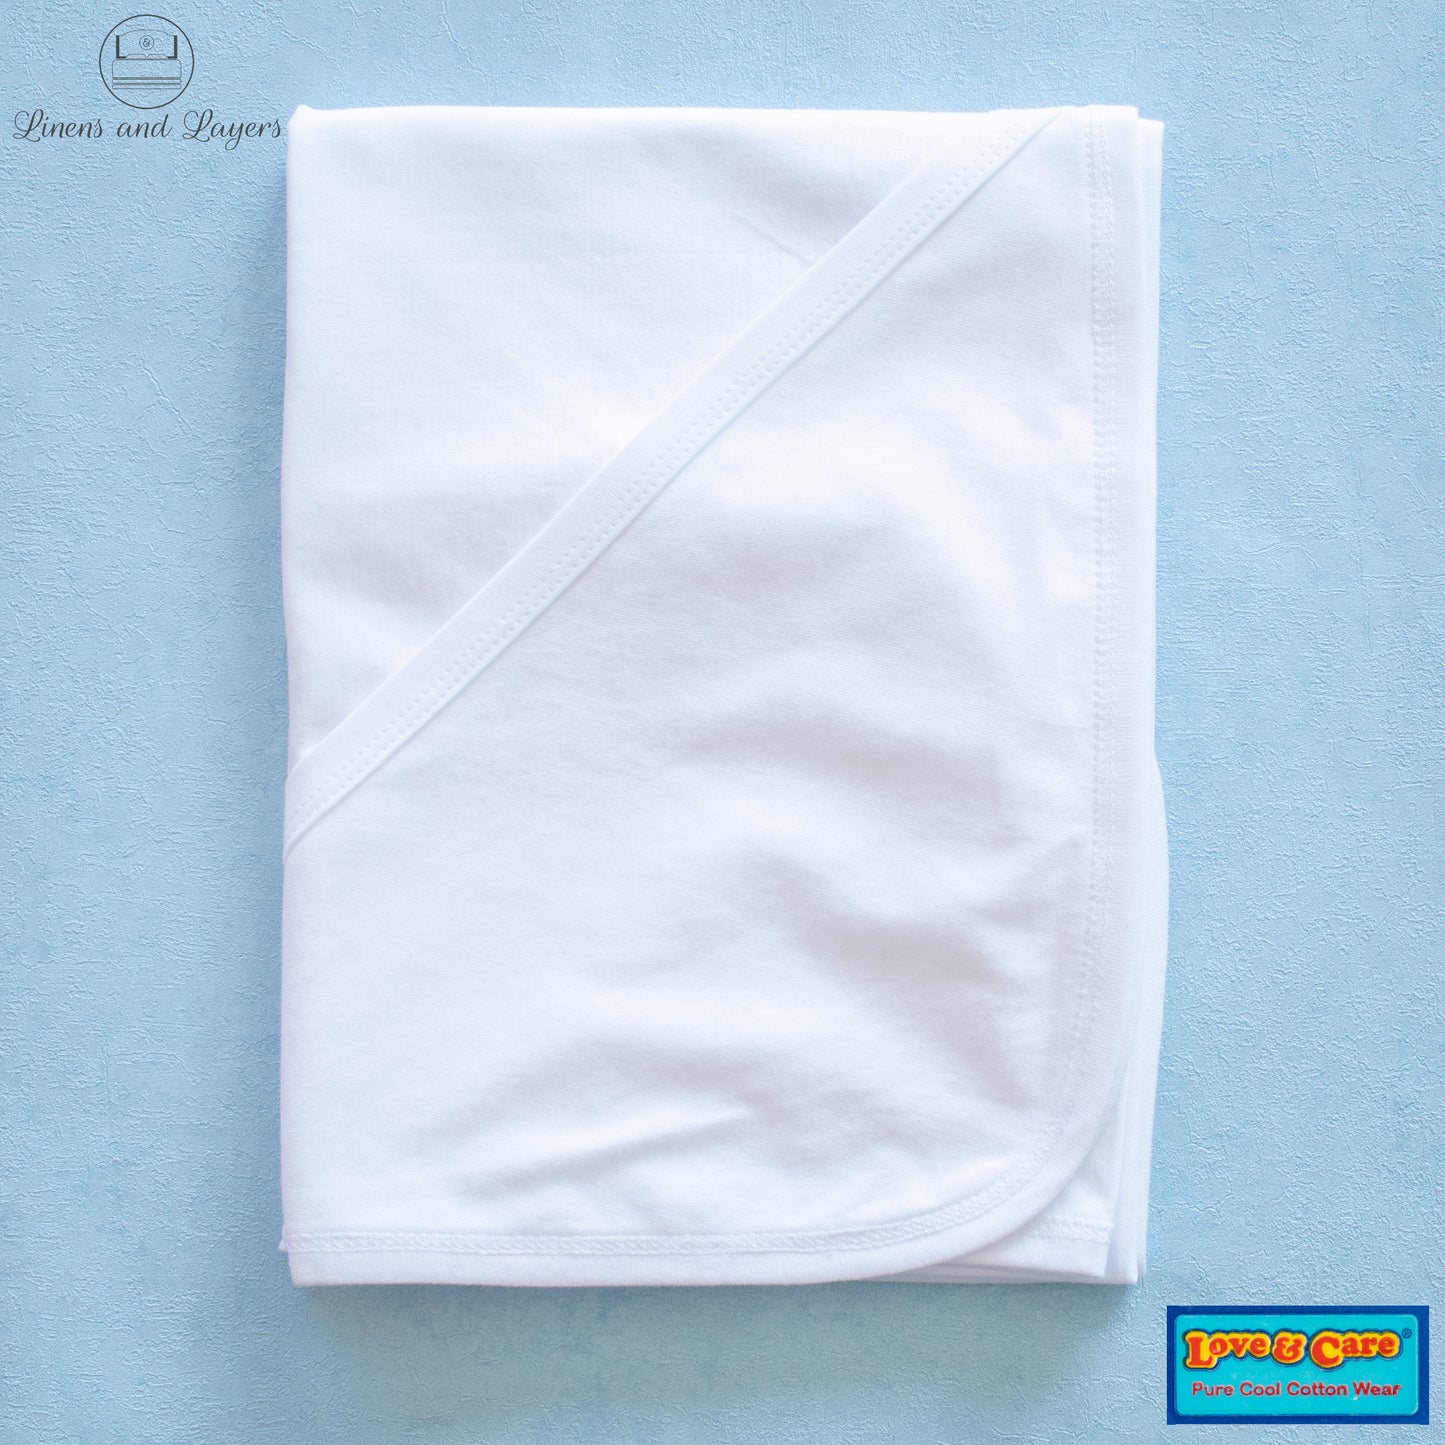 Love & Care - Pure Cotton Hooded Receiving Blanket for Newborn Baby